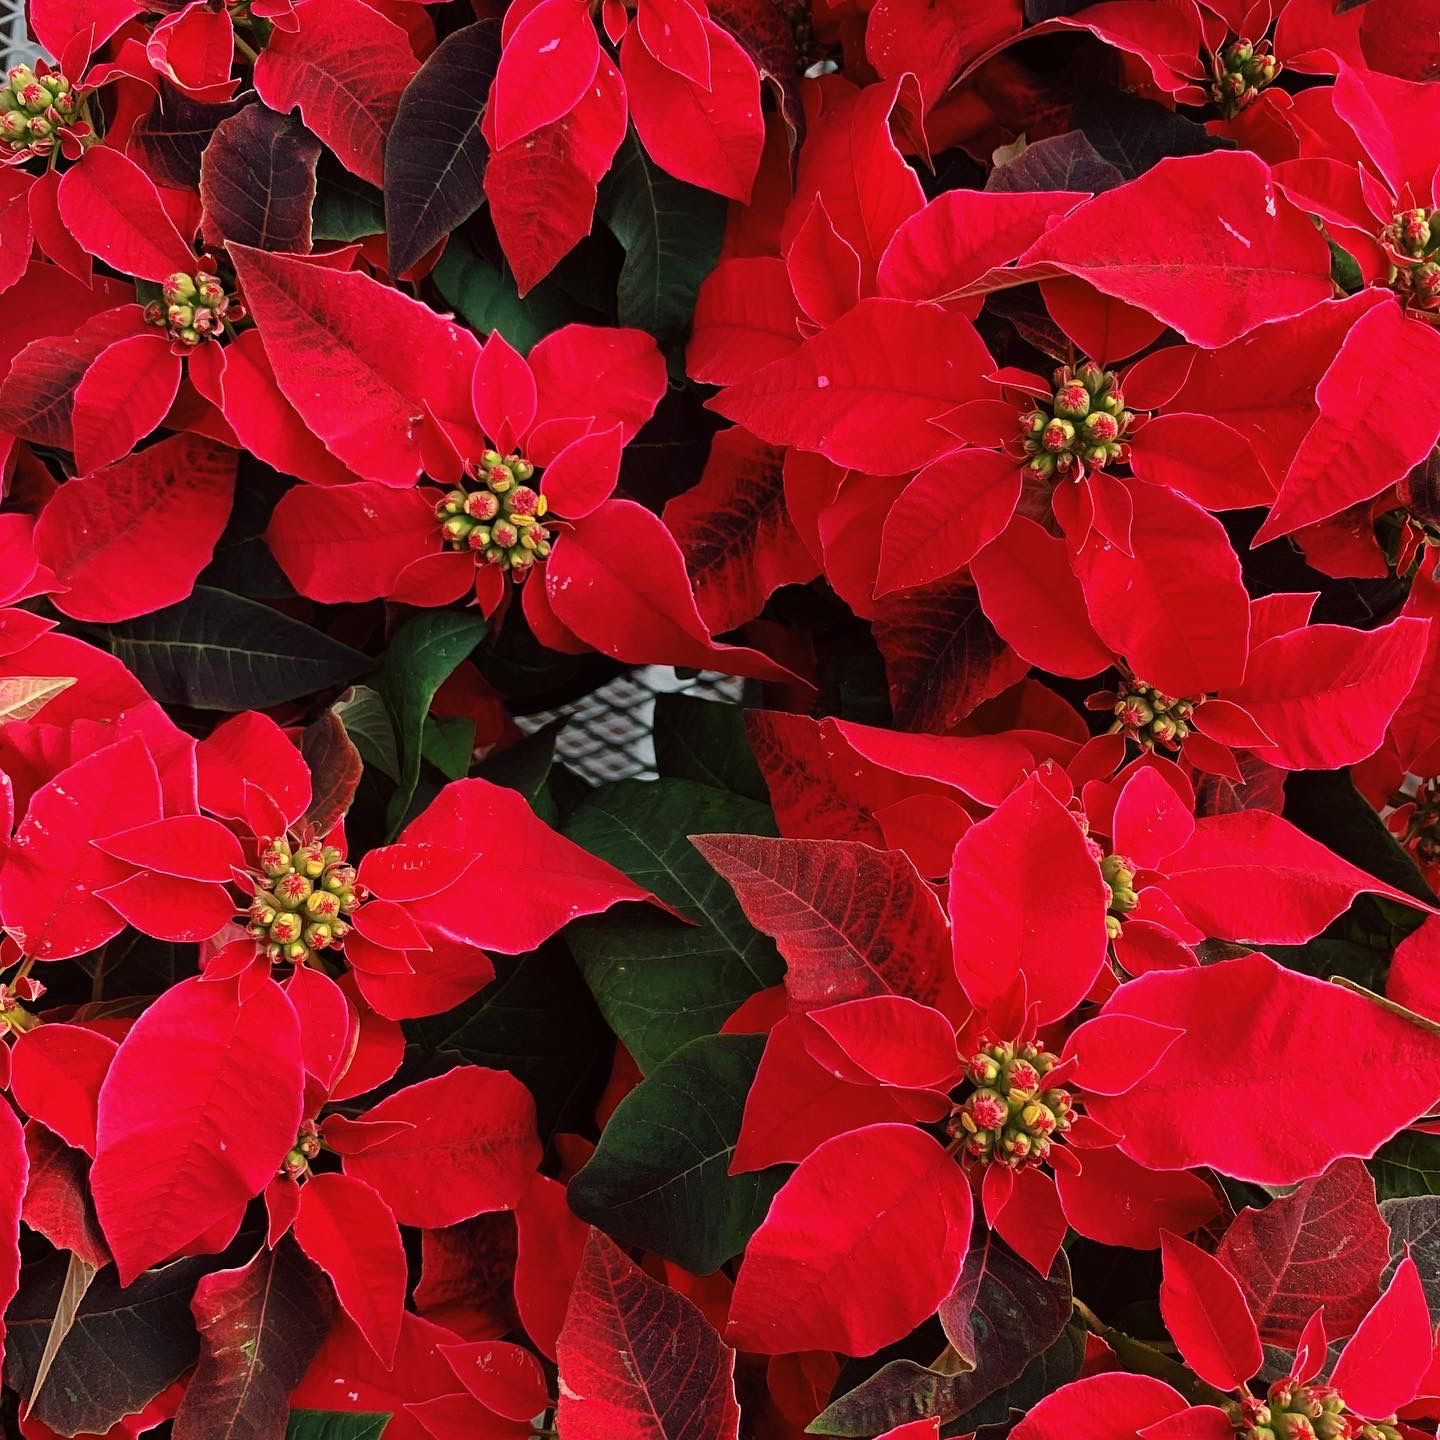 red poinsettias, holiday plant with red leaves